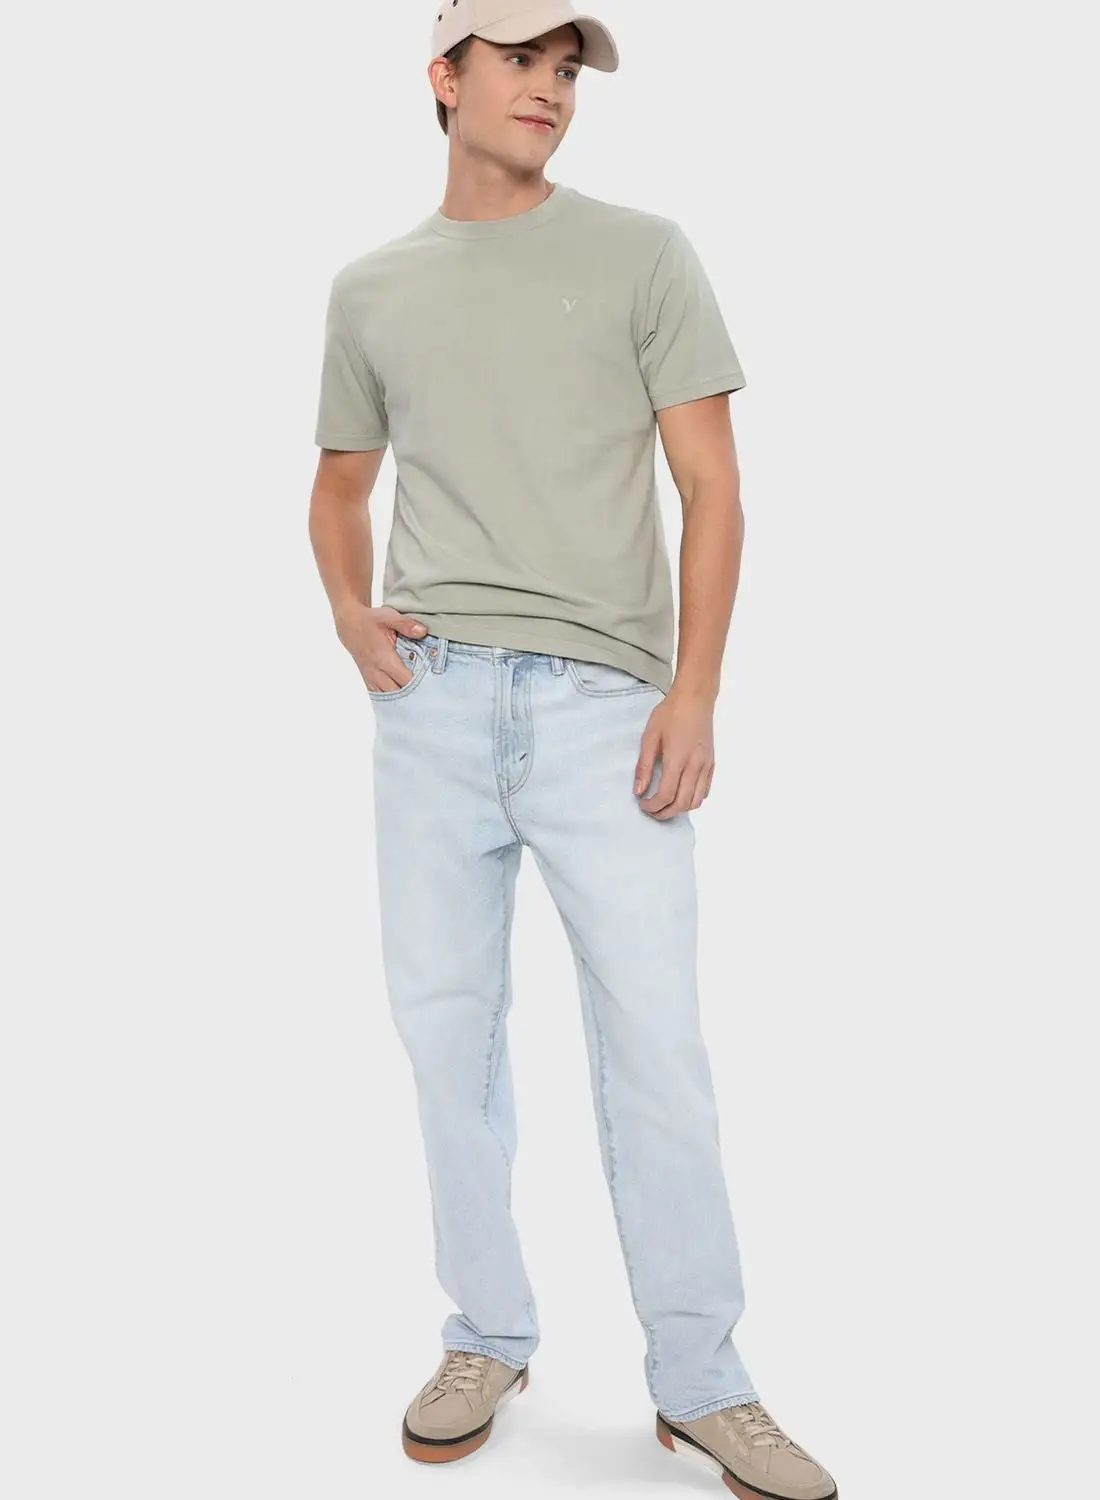 American Eagle Light Wash Relaxed Fit Jeans